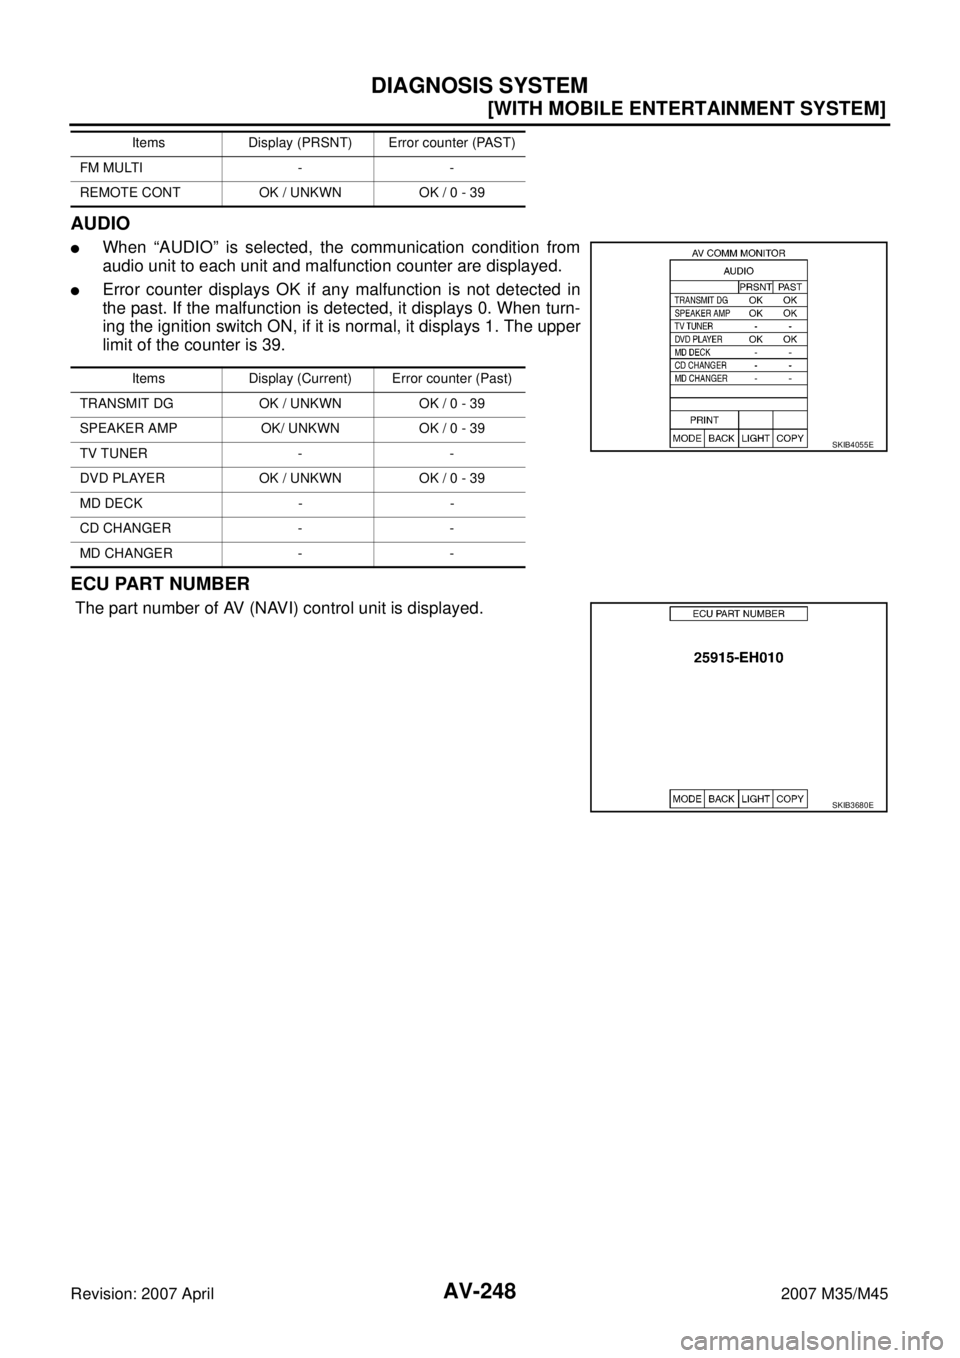 INFINITI M35 2007  Factory Service Manual AV-248
[WITH MOBILE ENTERTAINMENT SYSTEM]
DIAGNOSIS SYSTEM
Revision: 2007 April2007 M35/M45
AUDIO
When “AUDIO” is selected, the communication condition from
audio unit to each unit and malfunctio